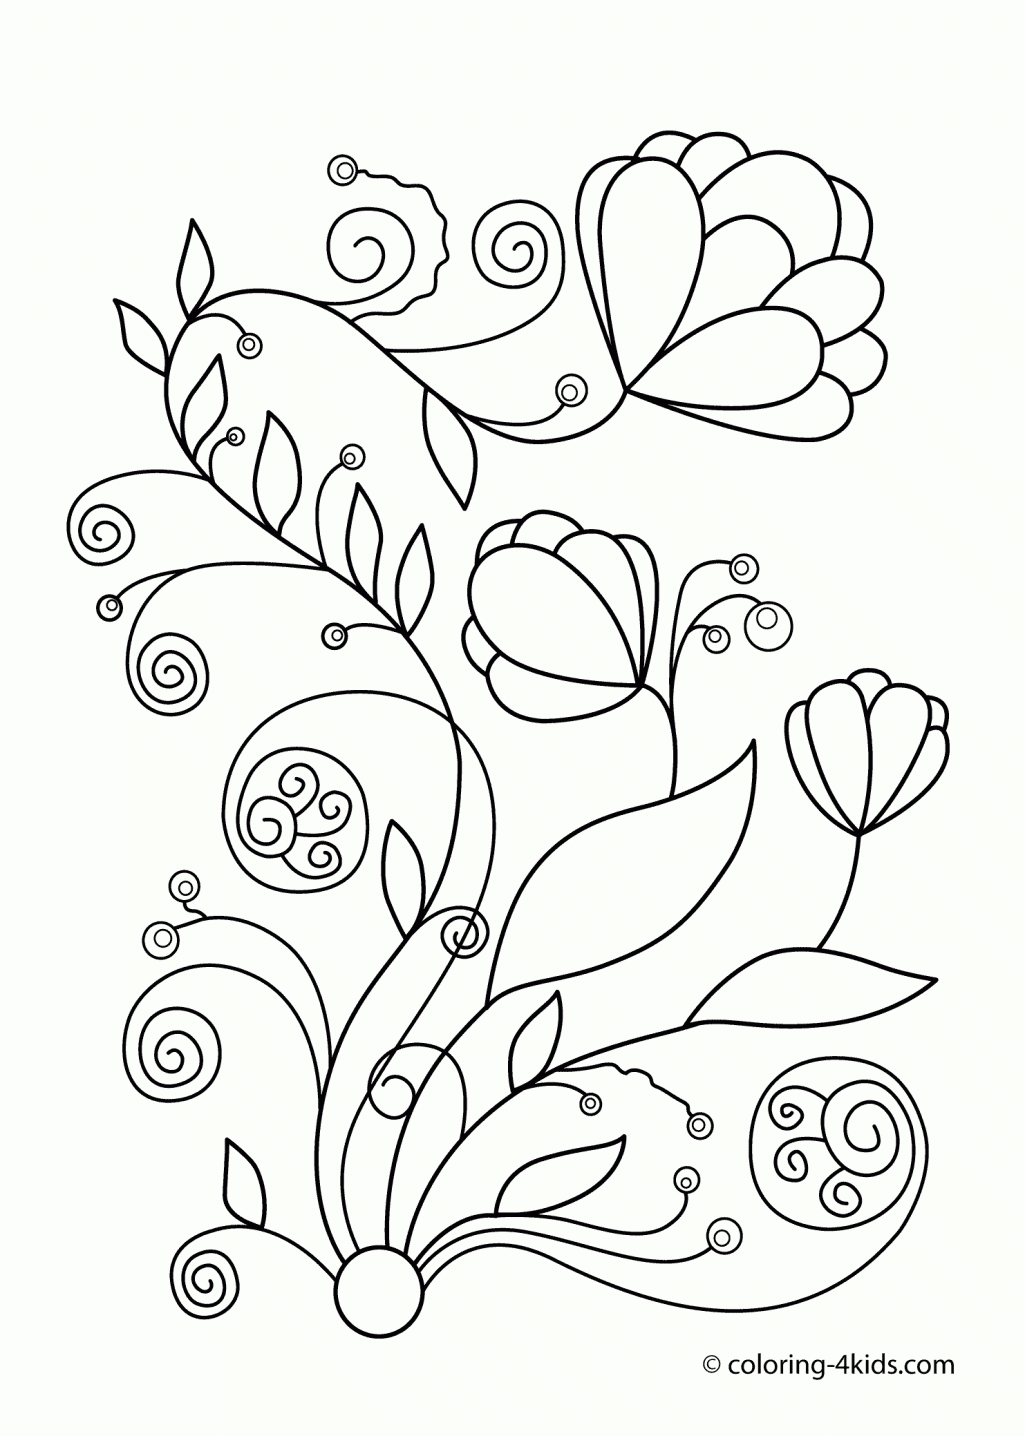 Flower Coloring Pages On Pinterest Adult Coloring Pages Dover ...